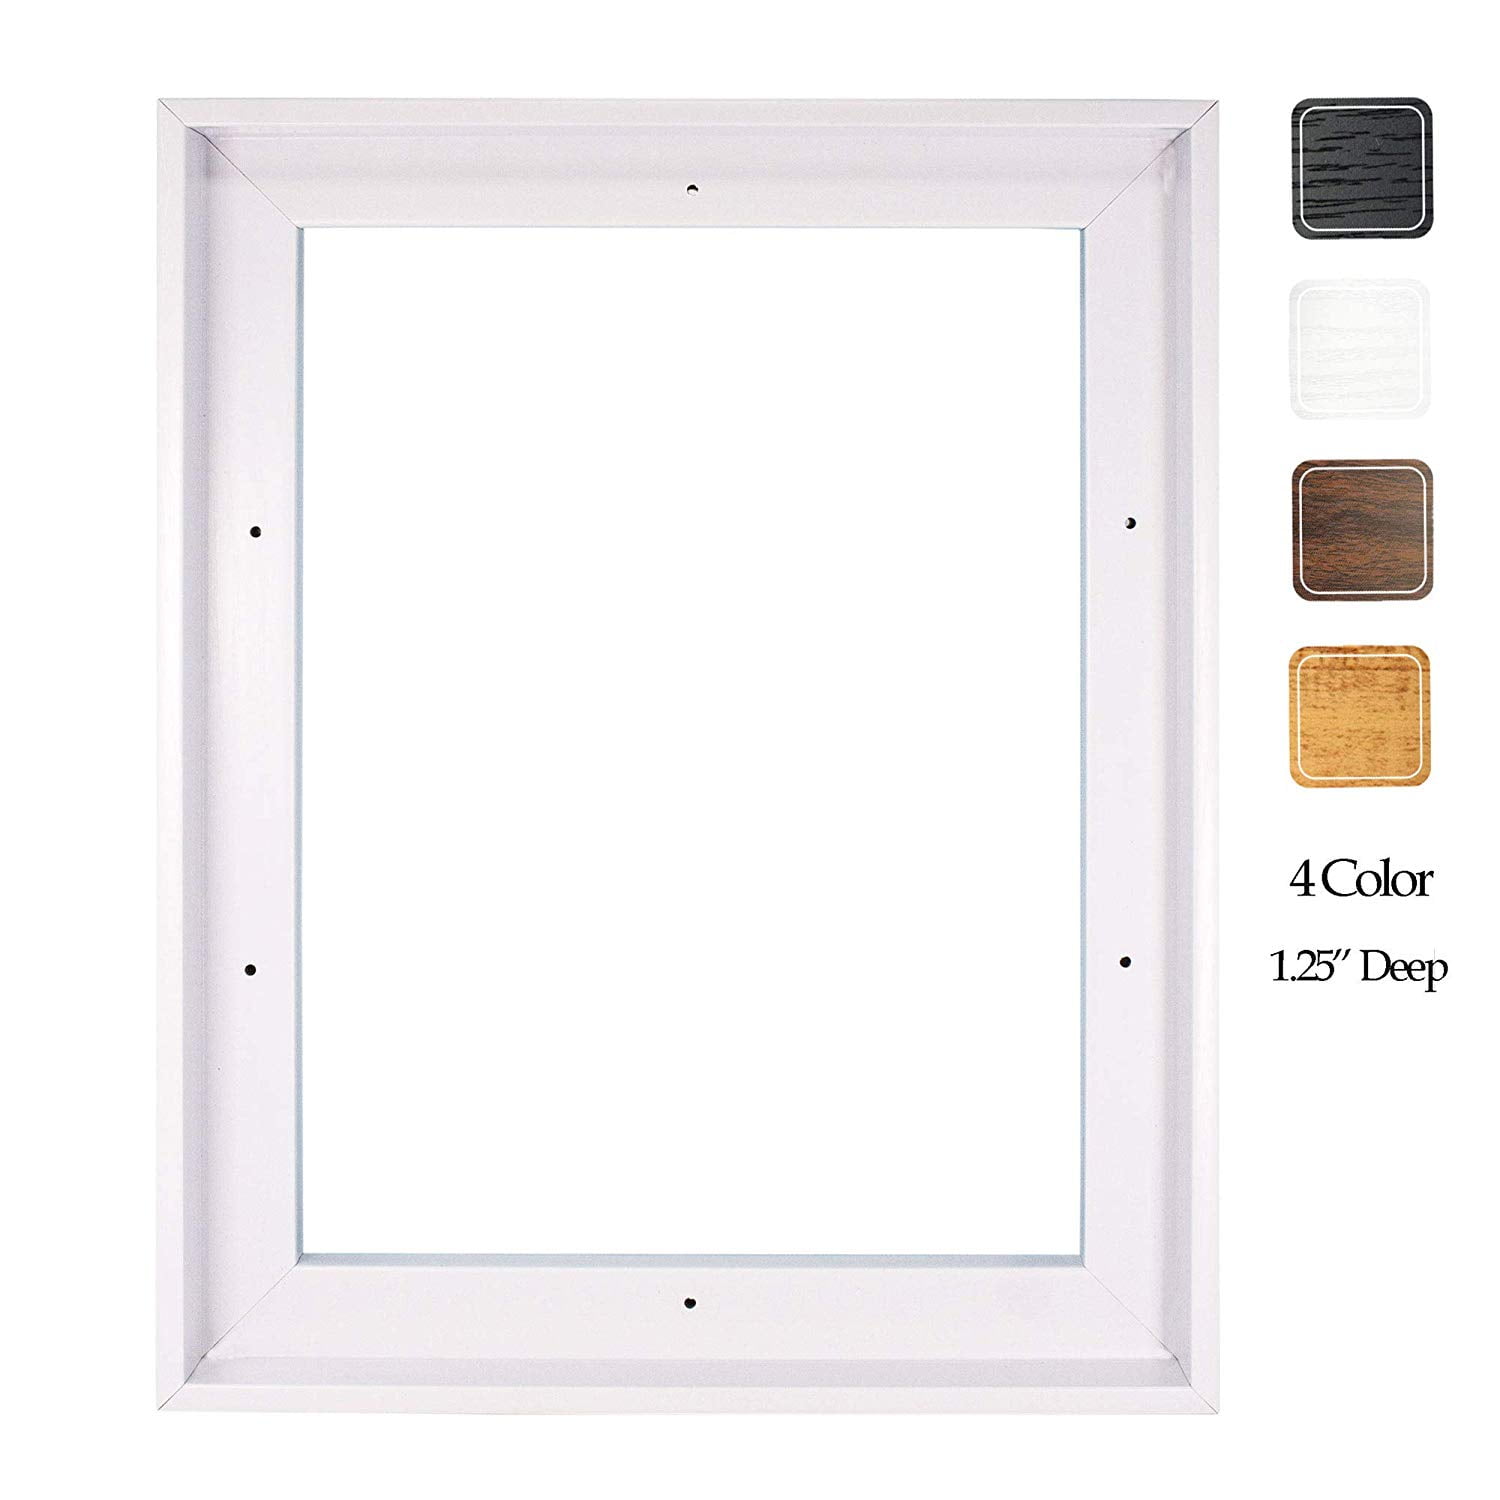 ARTISTS CANVAS FRAME PROFESSIONAL BLANK WHITE  Painting Board Art Paint Craft UK 